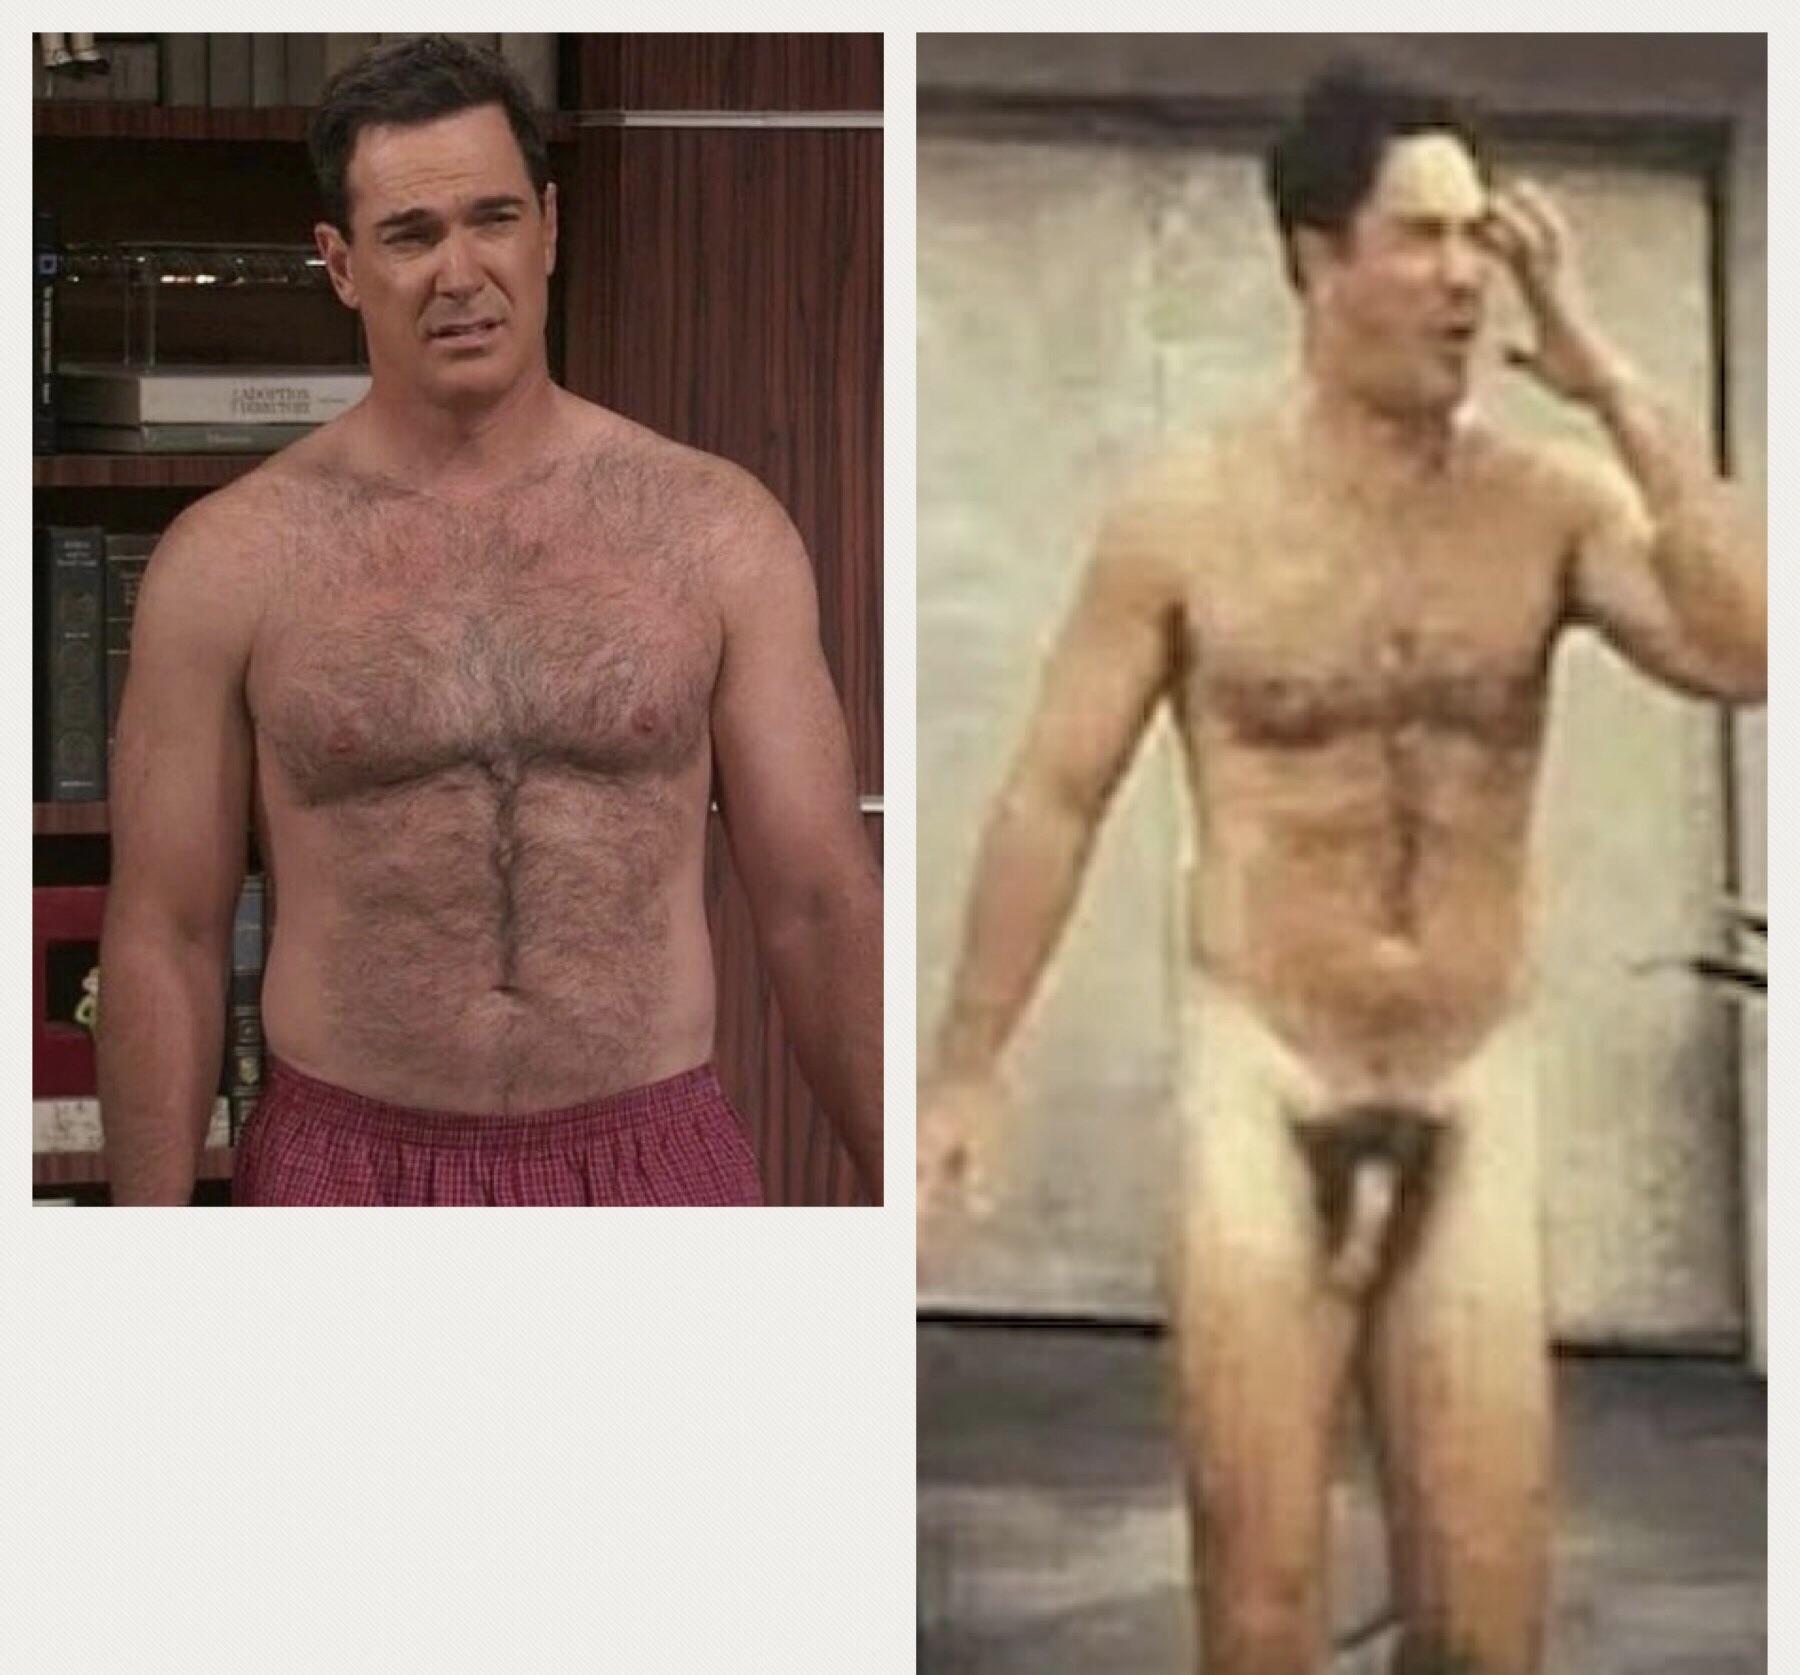 Curious about something..upvote if you’d sleep with Patrick Warburton